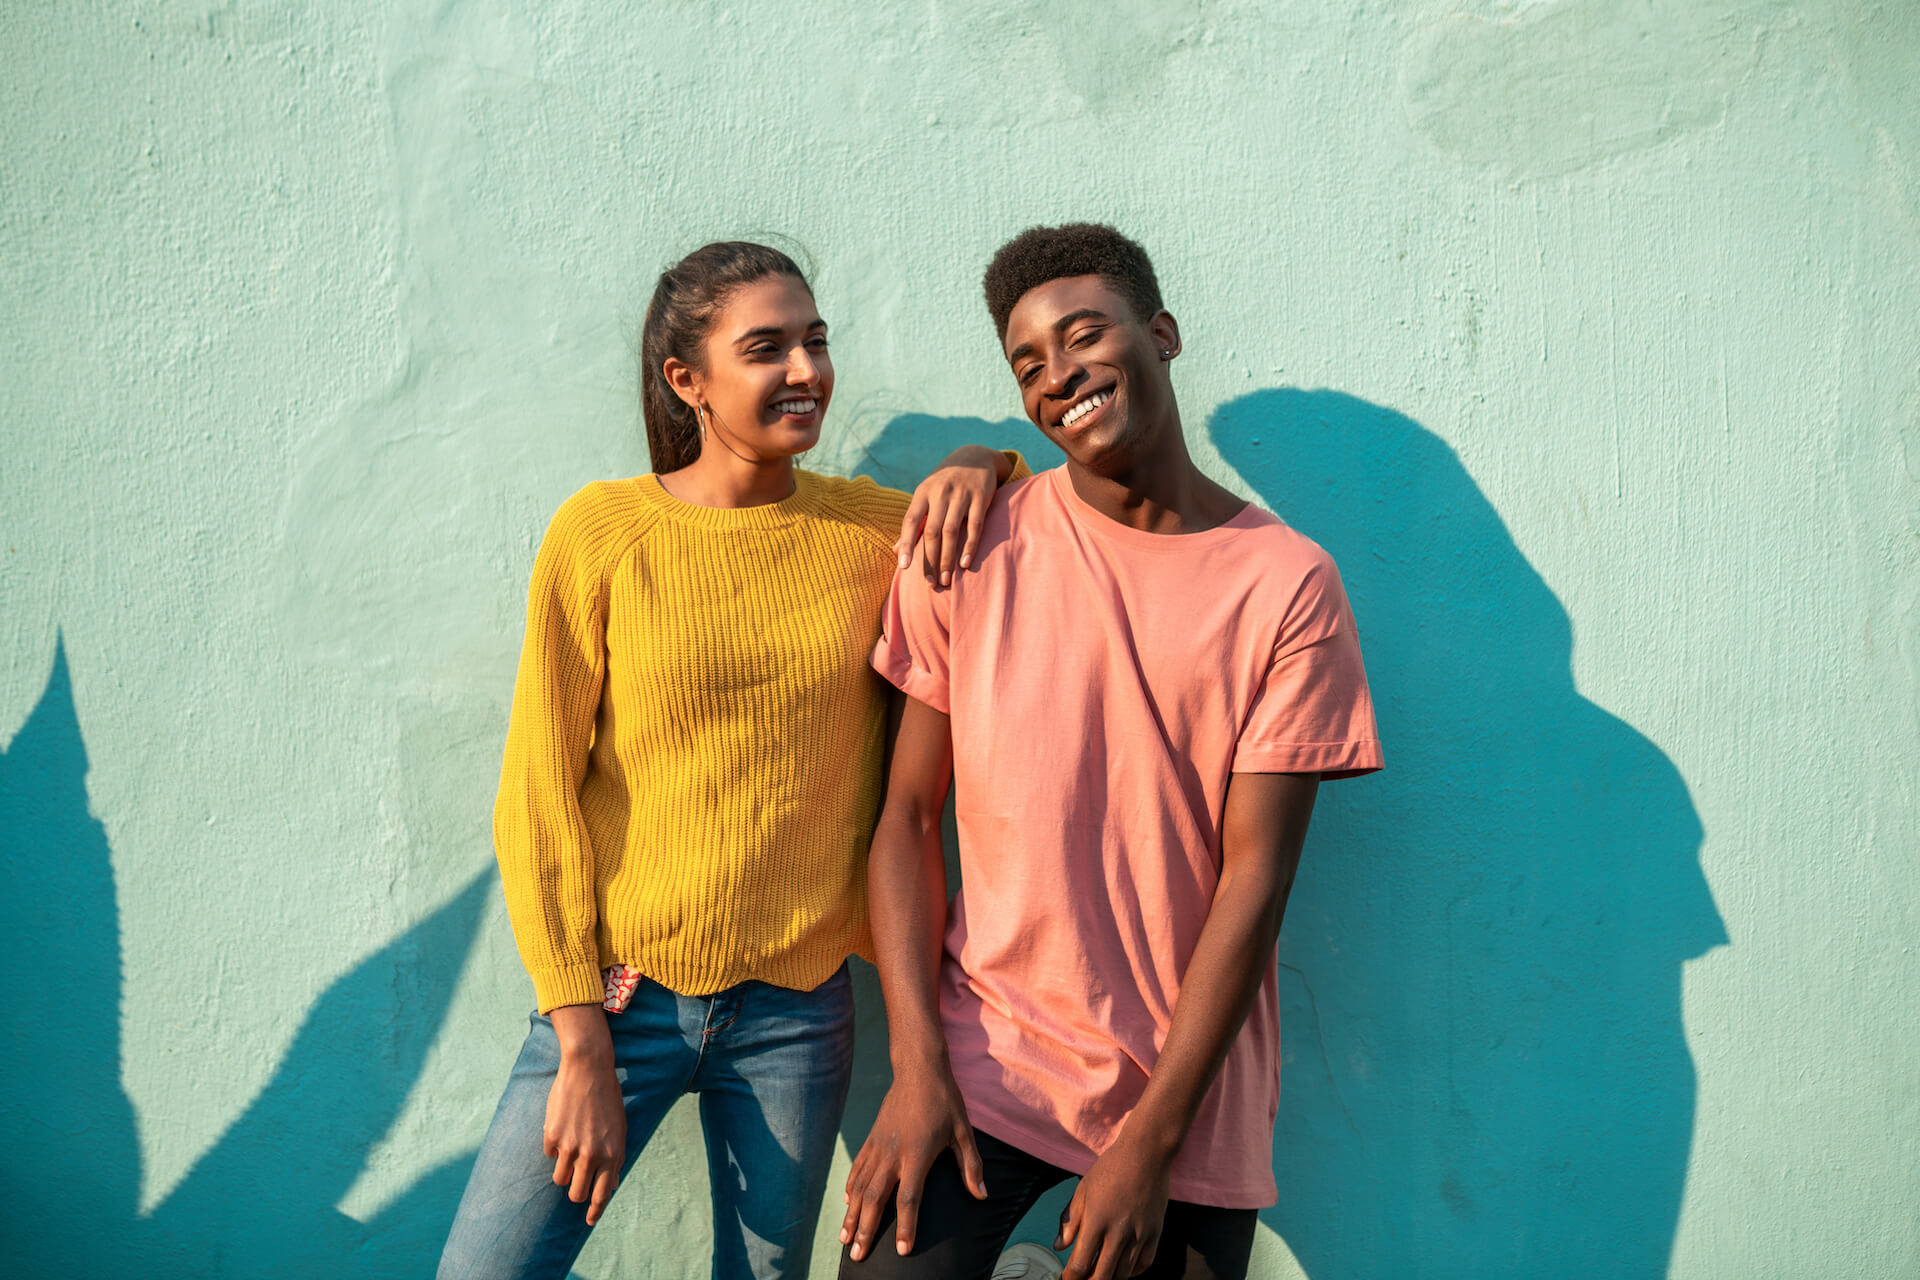 Two people standing and smiling by a green wall